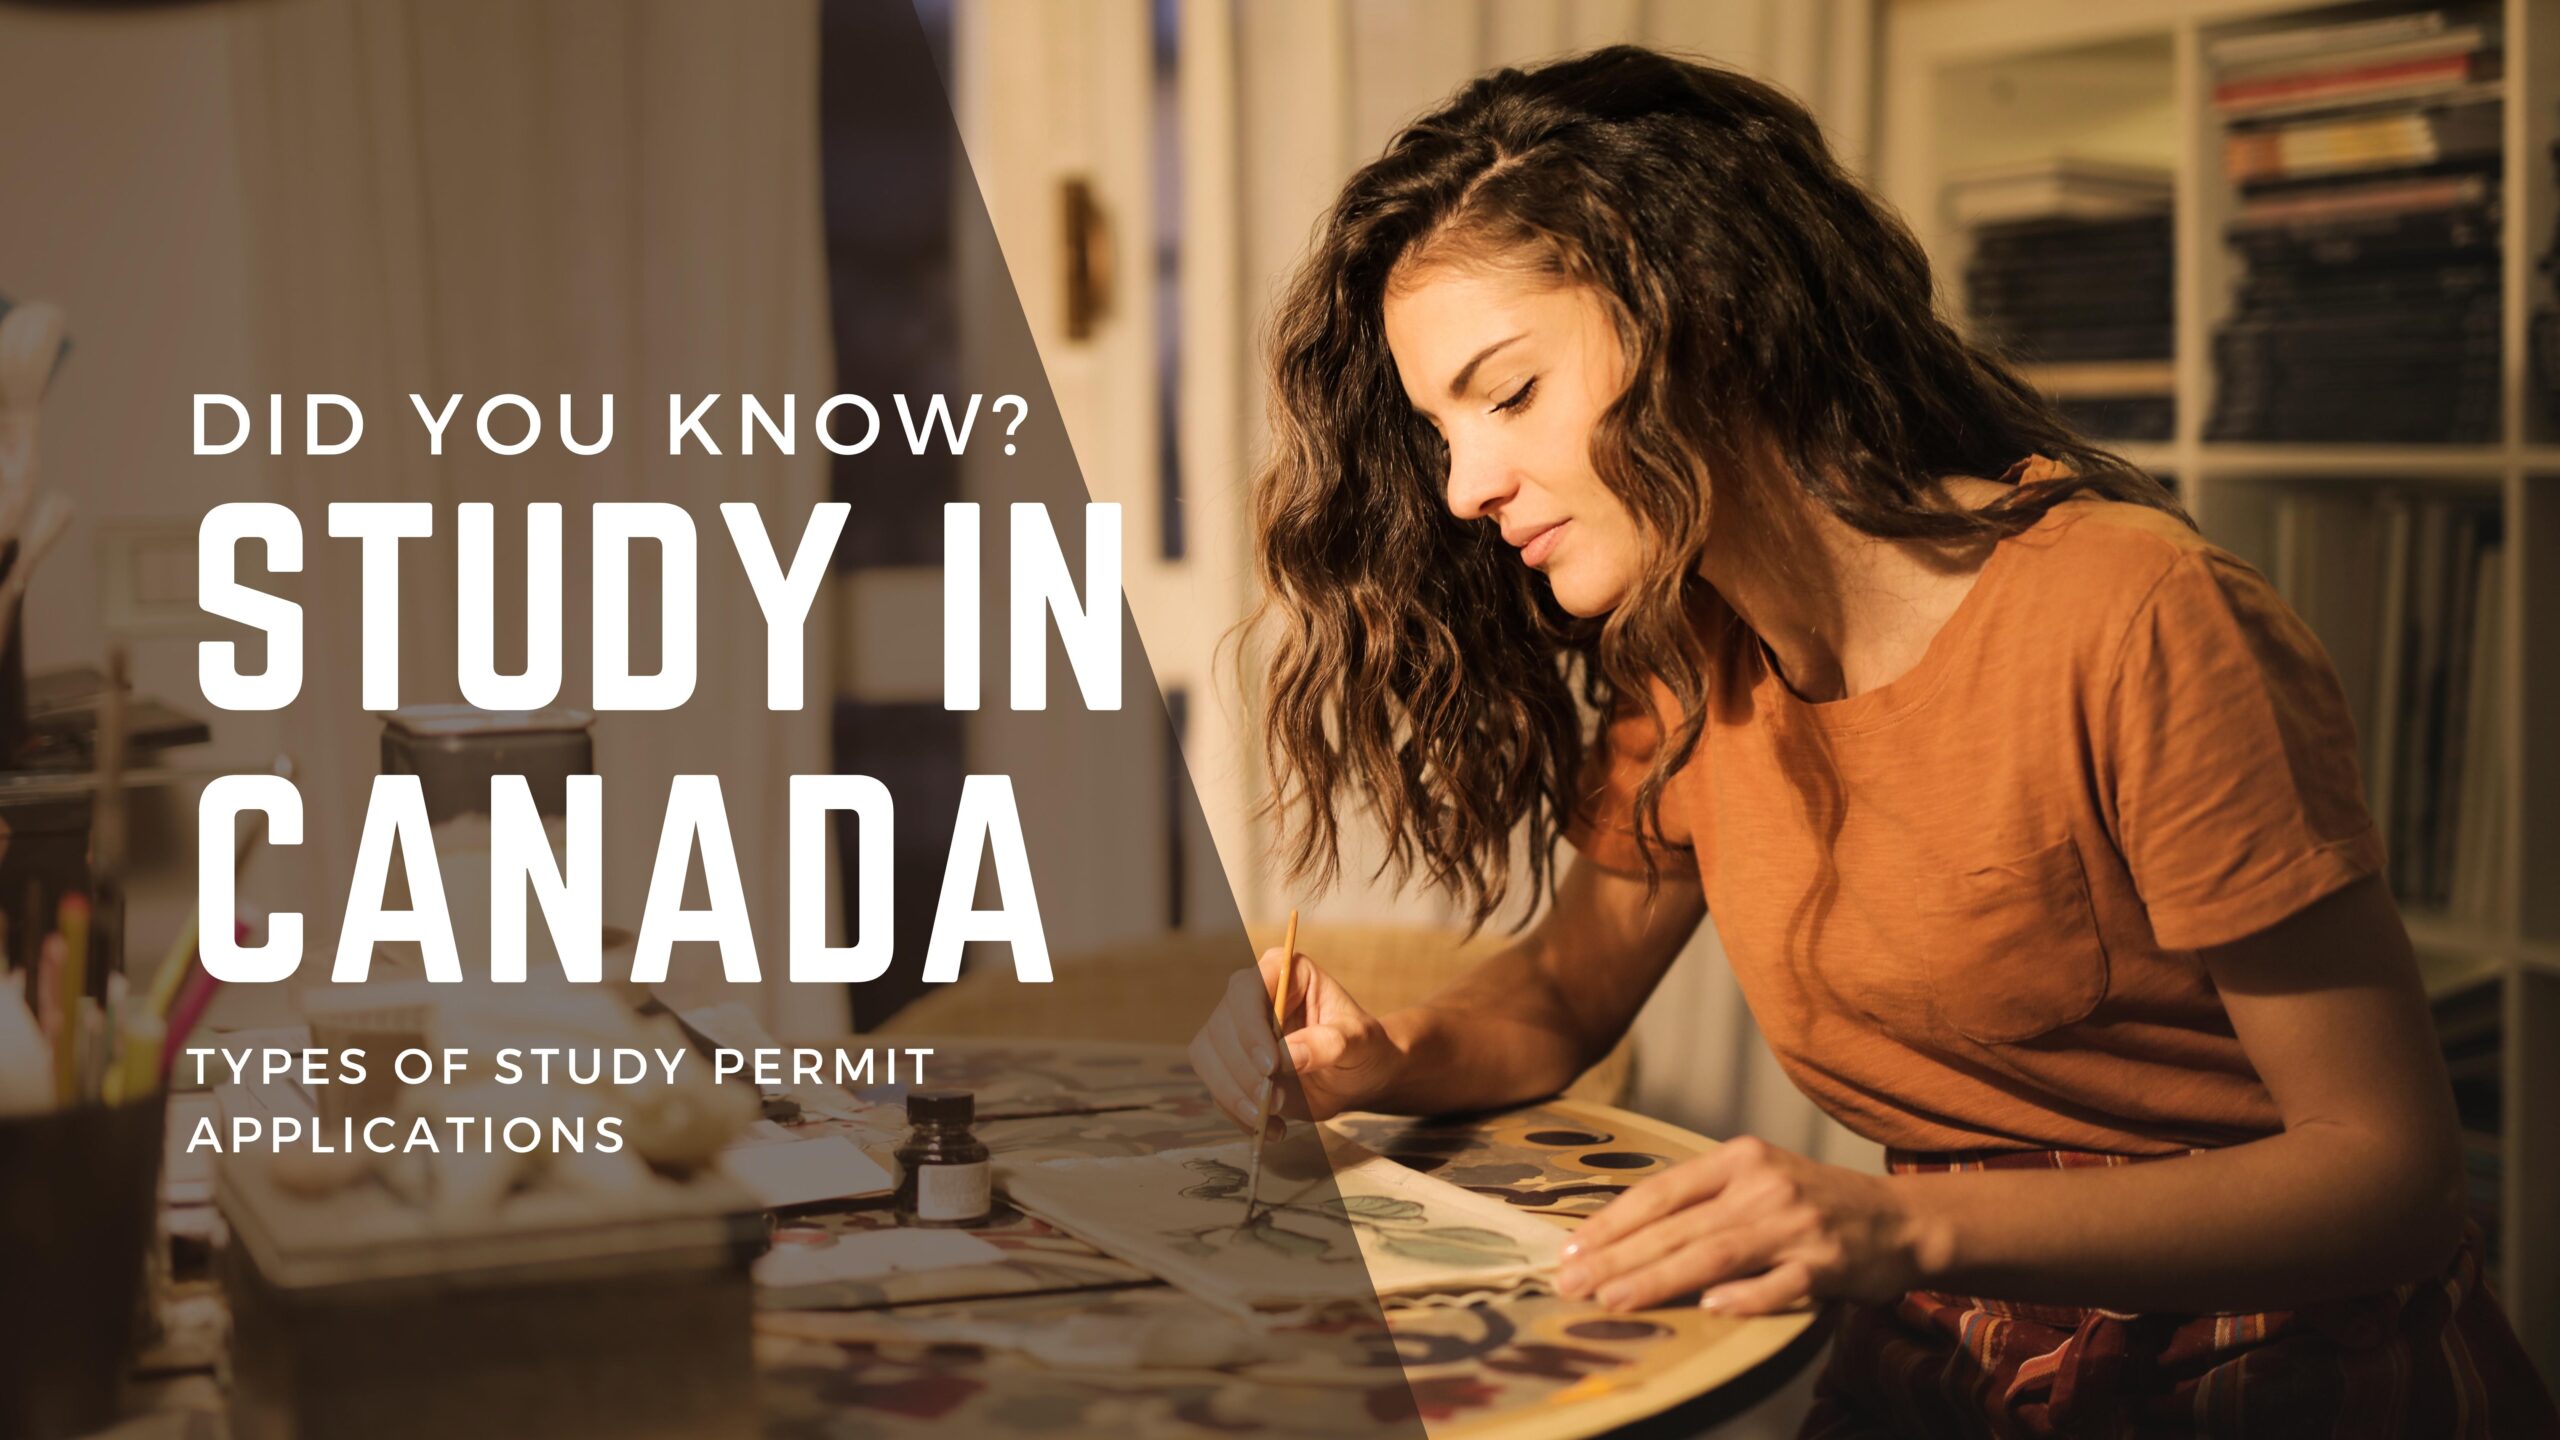 Everything You Need to Know About Applying to Study in Canada